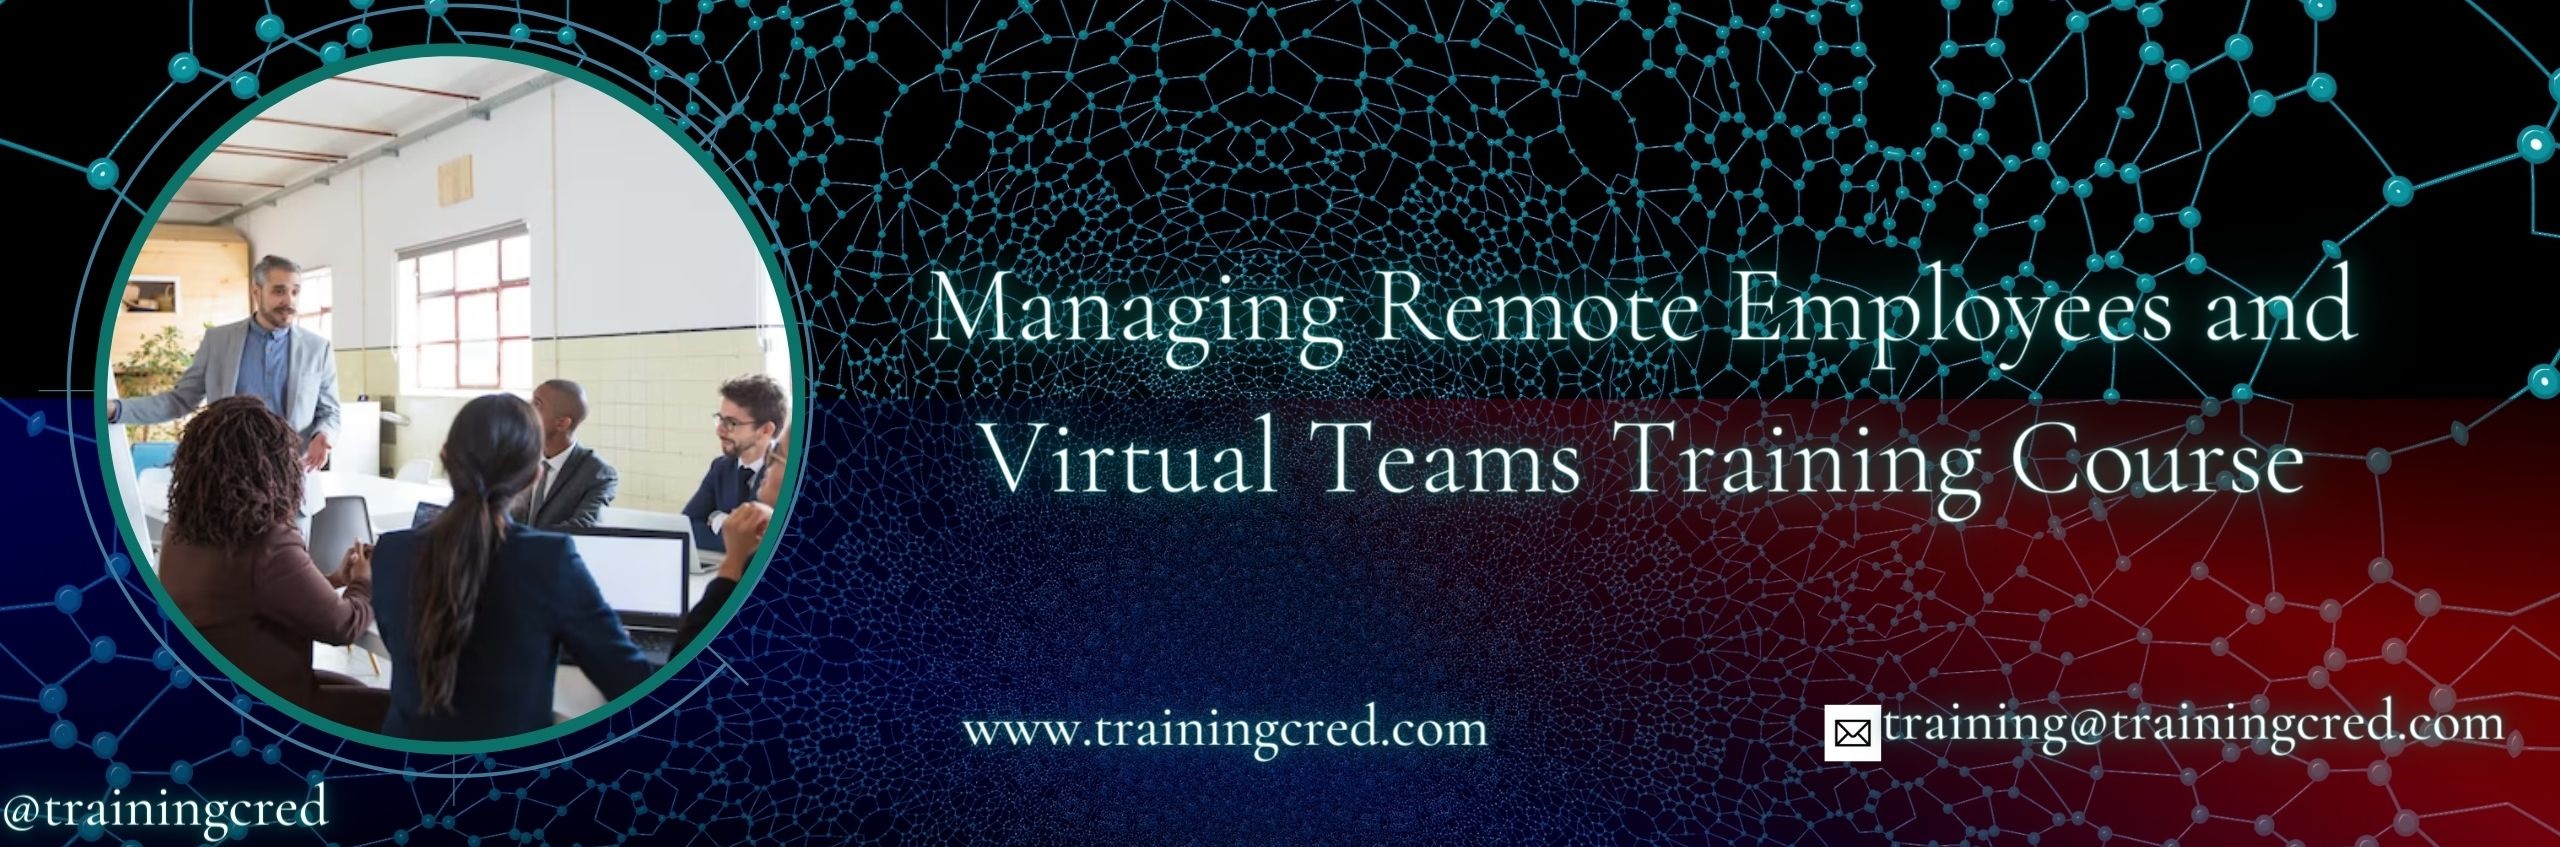 Managing Remote Employees and Virtual Teams Training